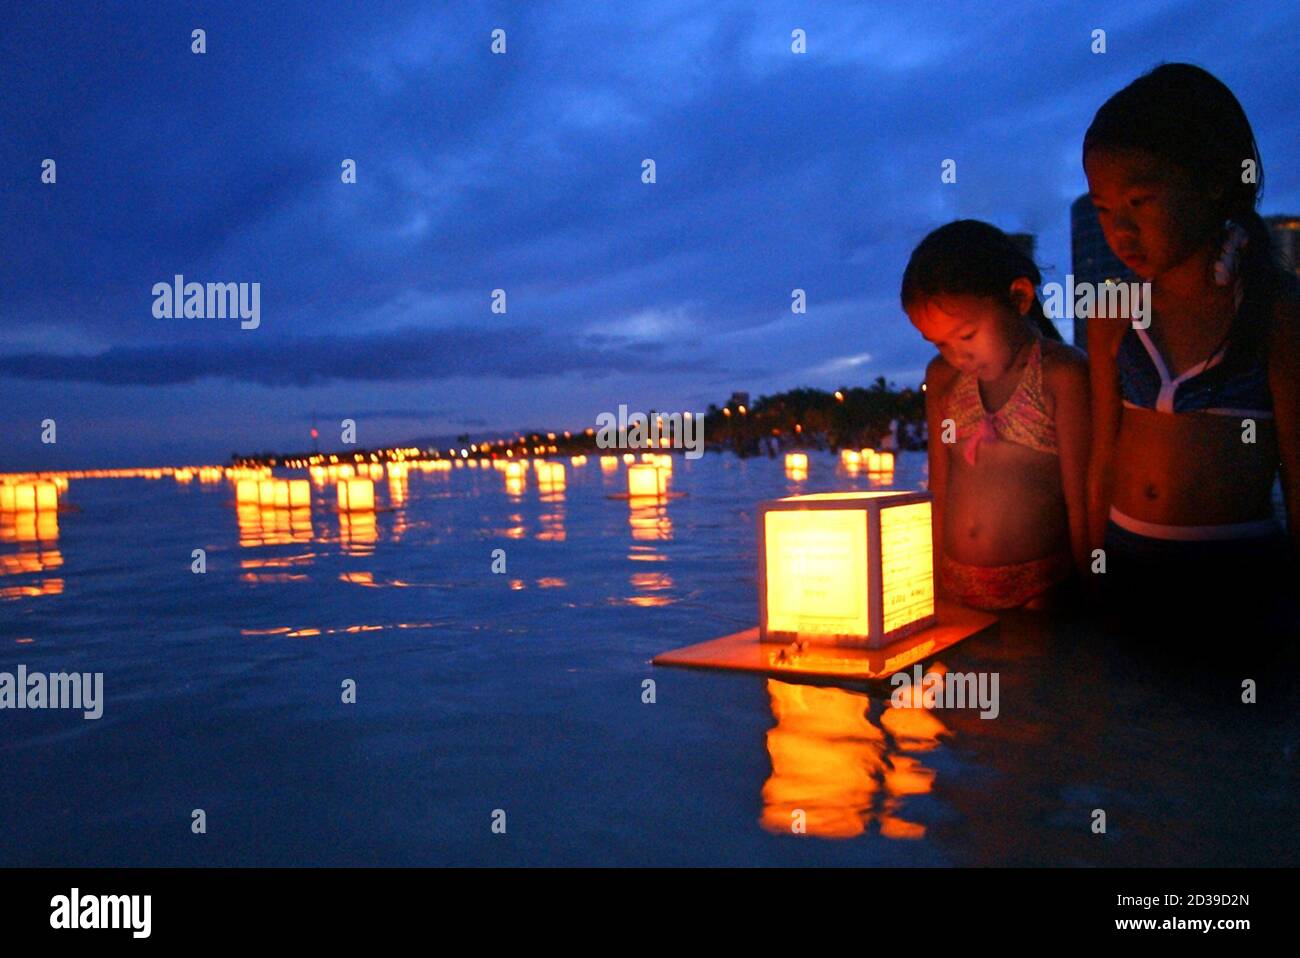 Two girls watch one of about a thousand lanterns set afloat in the waters  off of Ala Moana Beach near Waikiki in Honolulu, Hawaii. Two girls watch  one of about a thousand